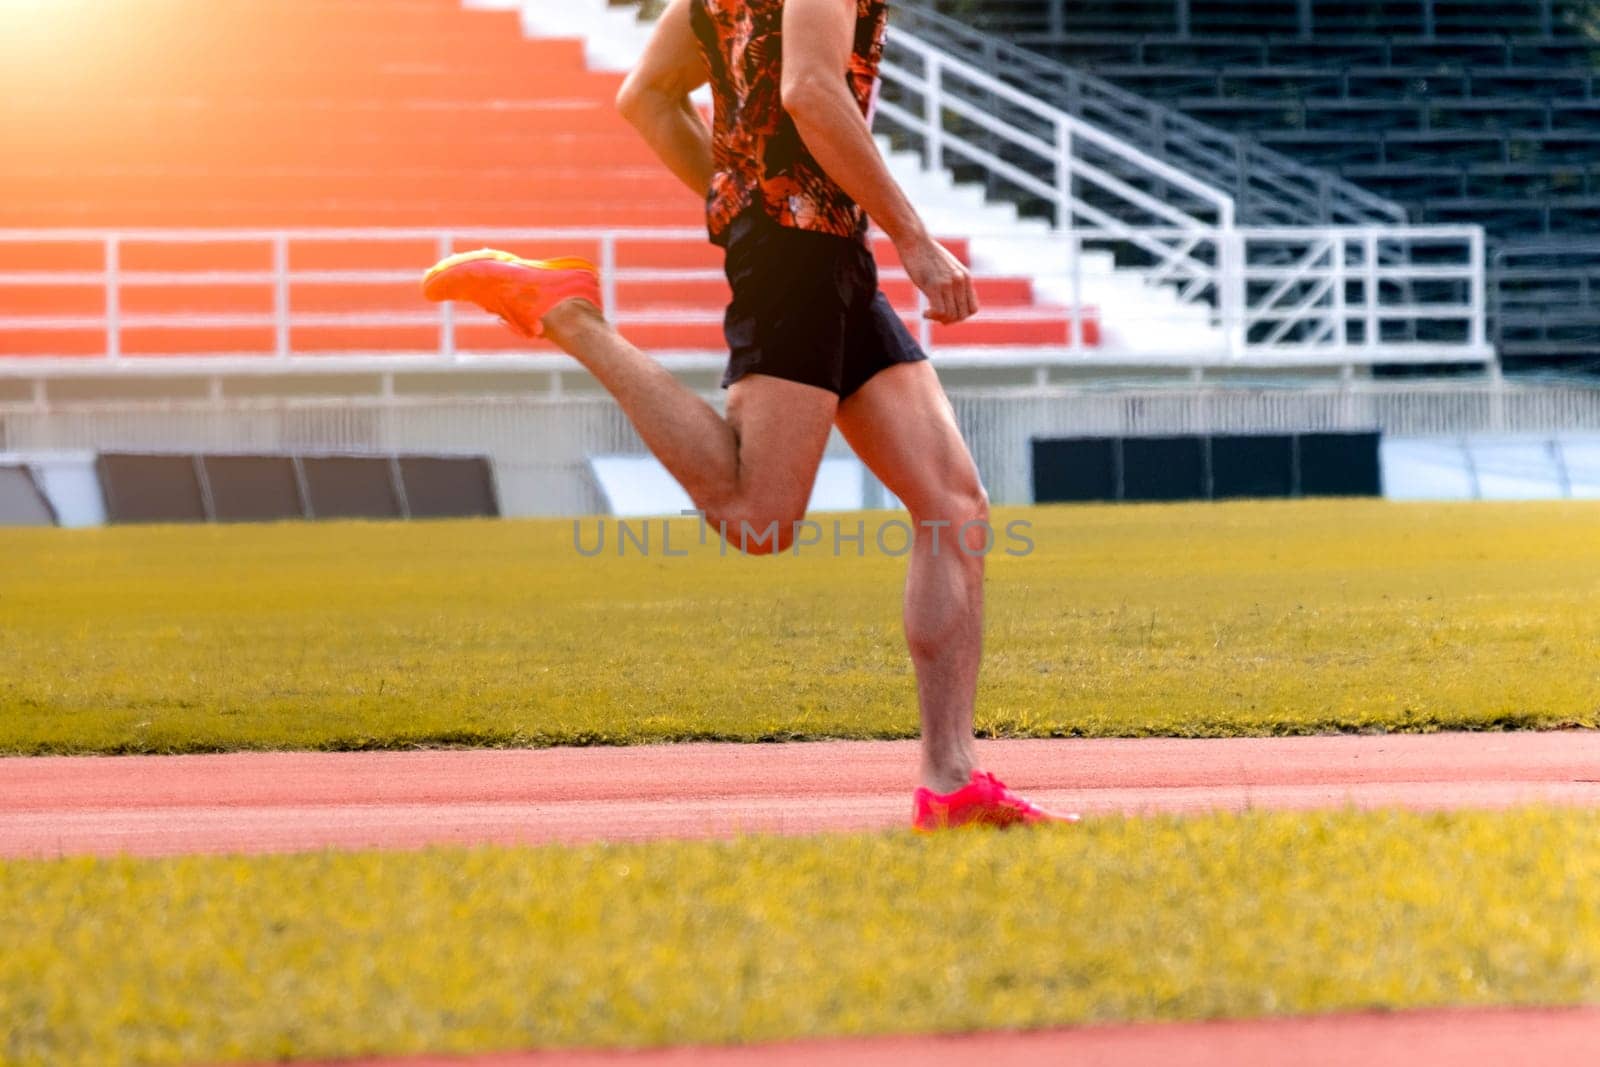 The feet of an athlete running outdoors at the racetrack. Fit young man is running on the race track. Male runner in sportswear running on stadium track with red coating outdoors. by TEERASAK